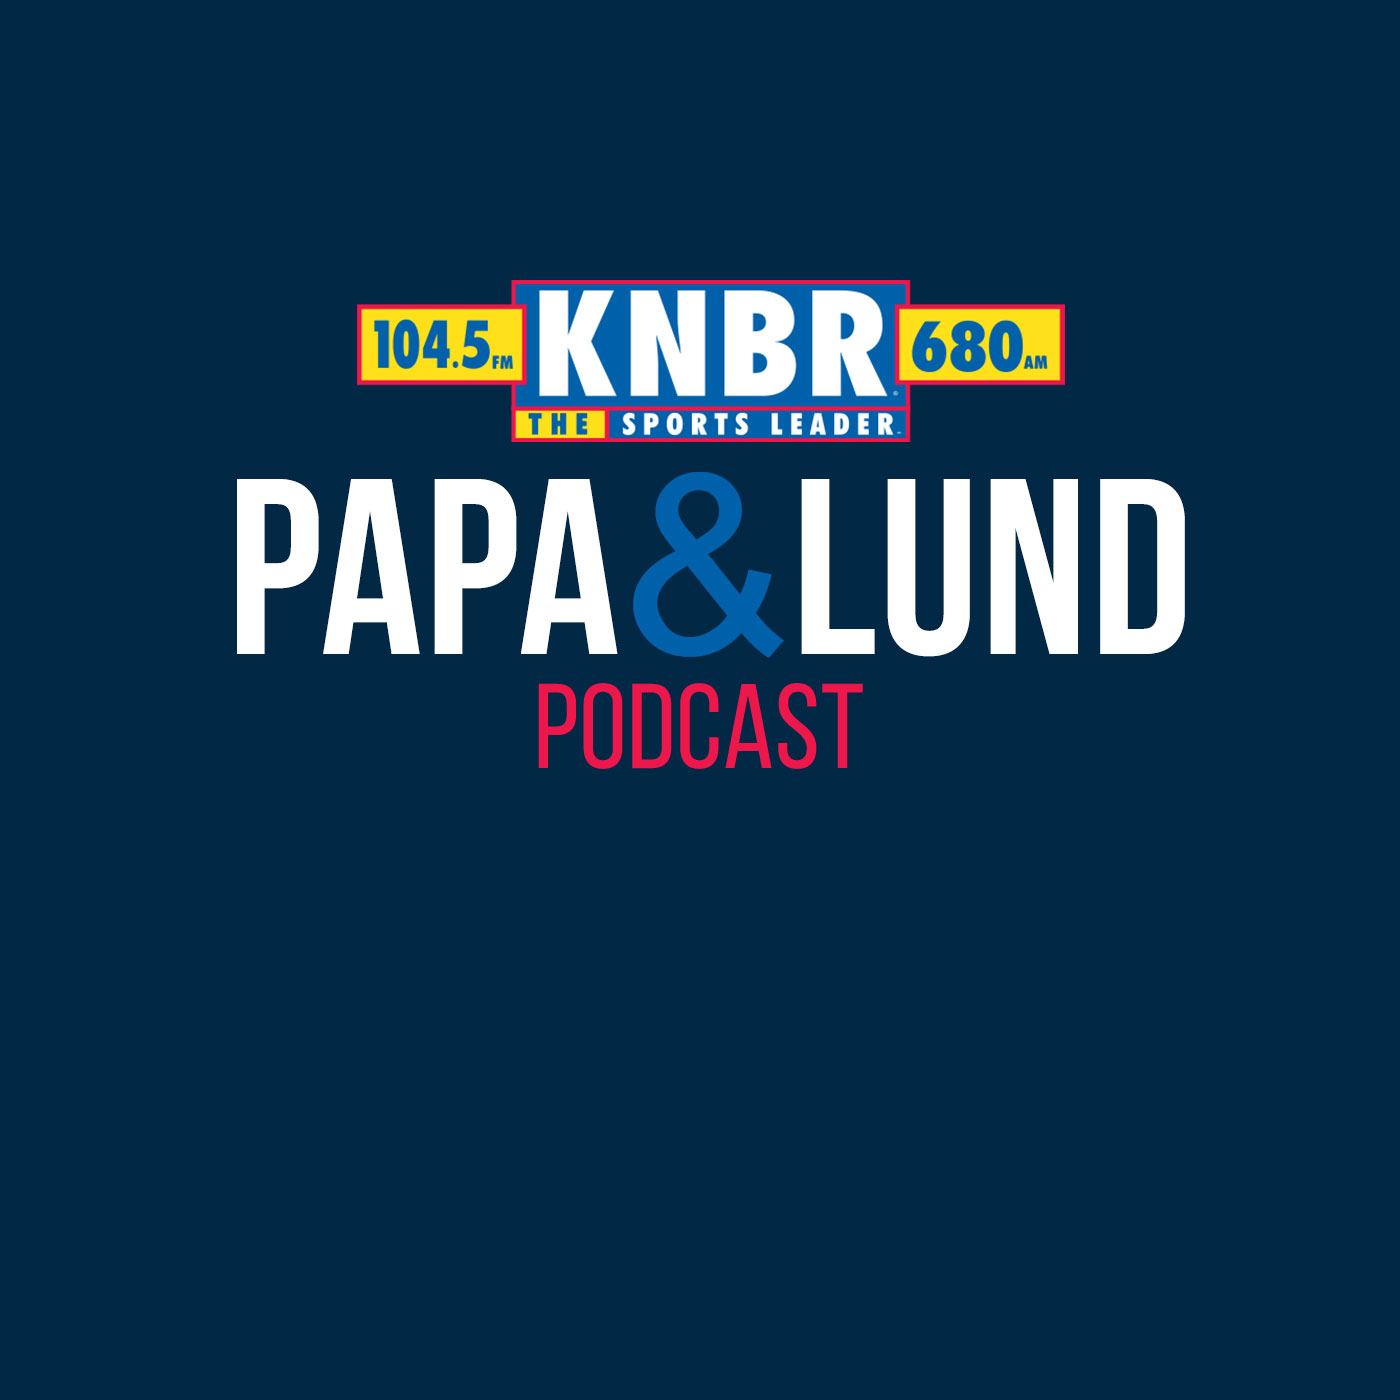 12-7 Garry St Jean joins Papa & Lund to discuss the current state of the Warriors as their struggles to get offense from anyone not named Steph Curry continue